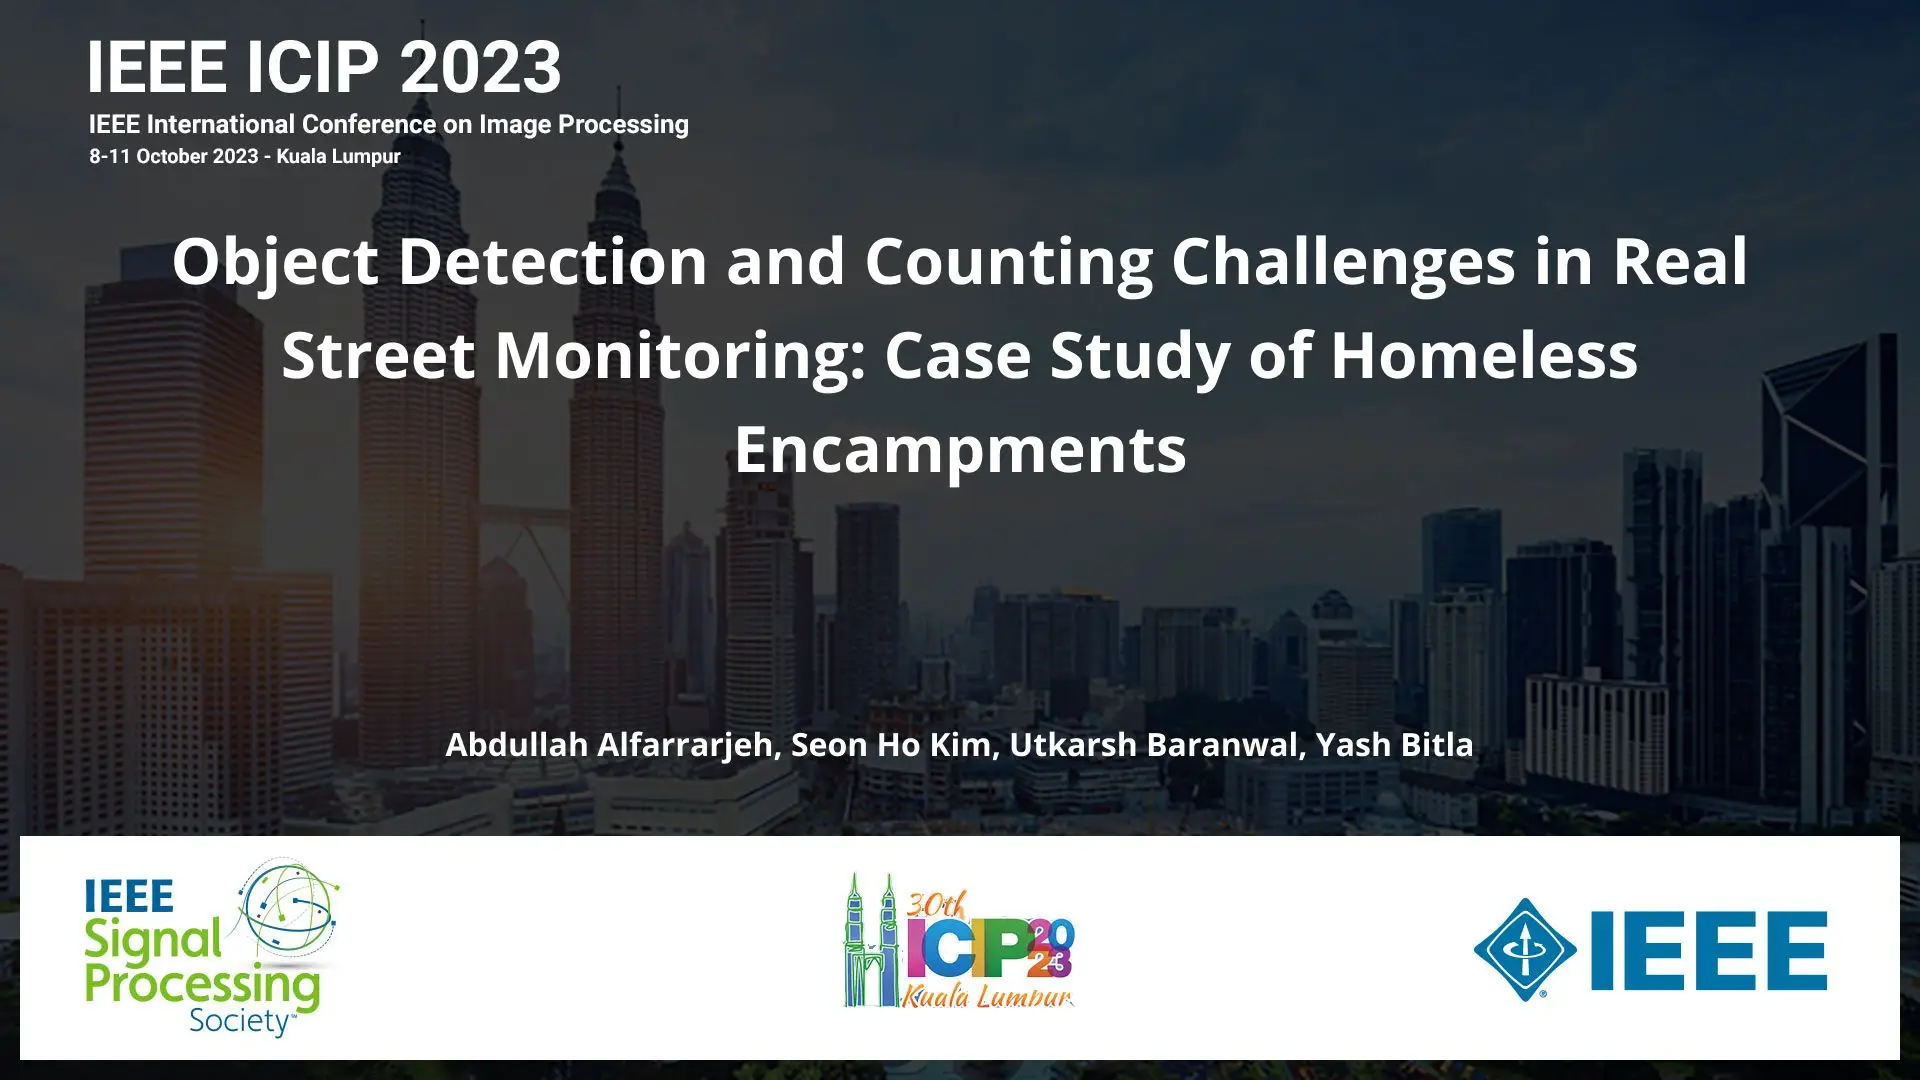 Object Detection and Counting Challenges in Real Street Monitoring: Case Study of Homeless Encampments